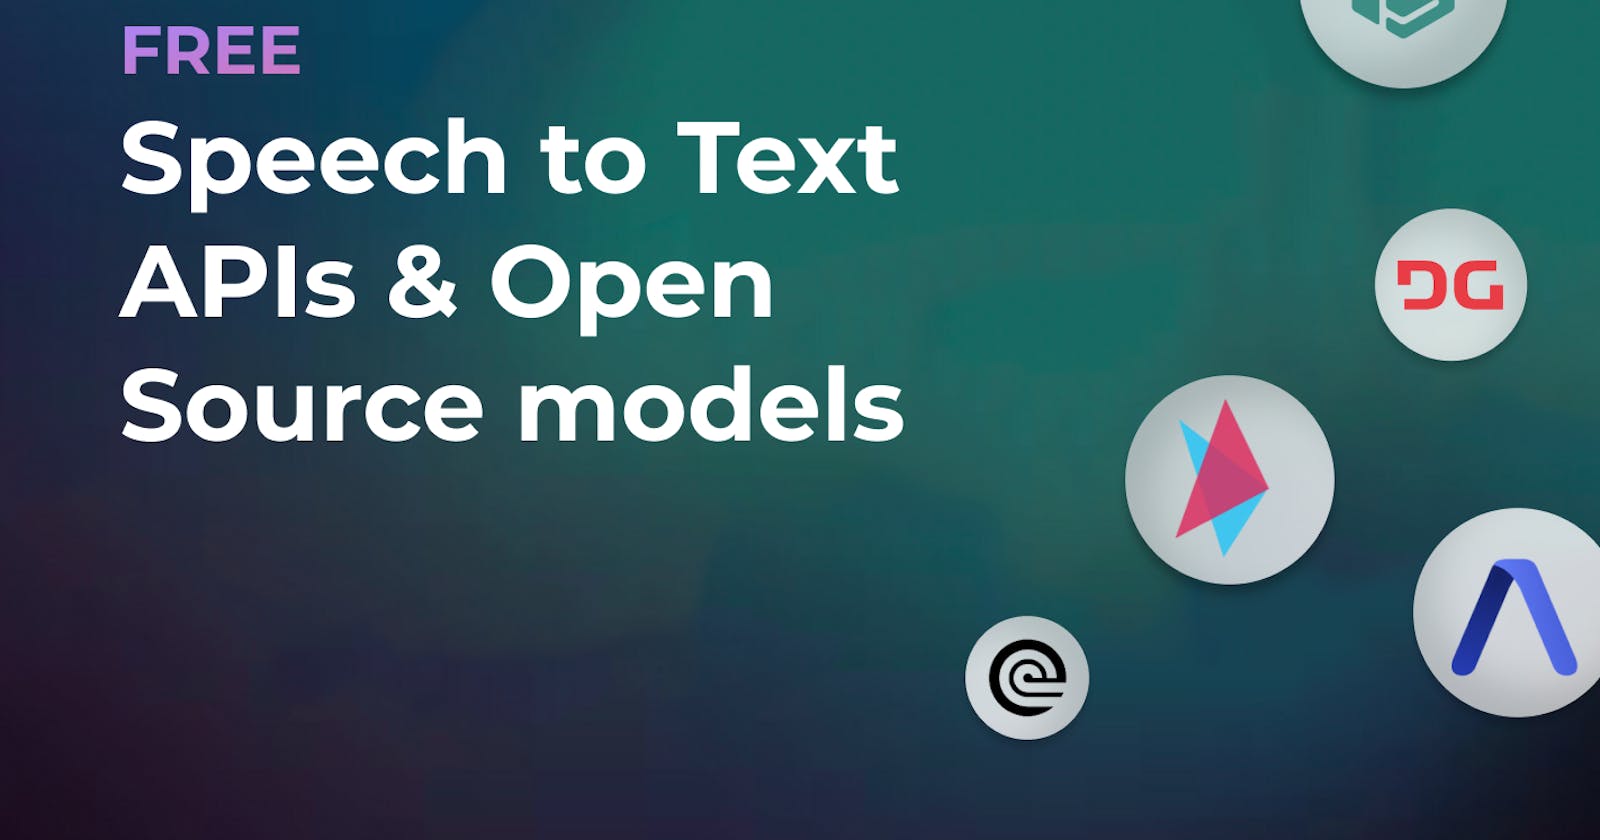 Top Free Speech to Text tools, APIs, and Open Source models